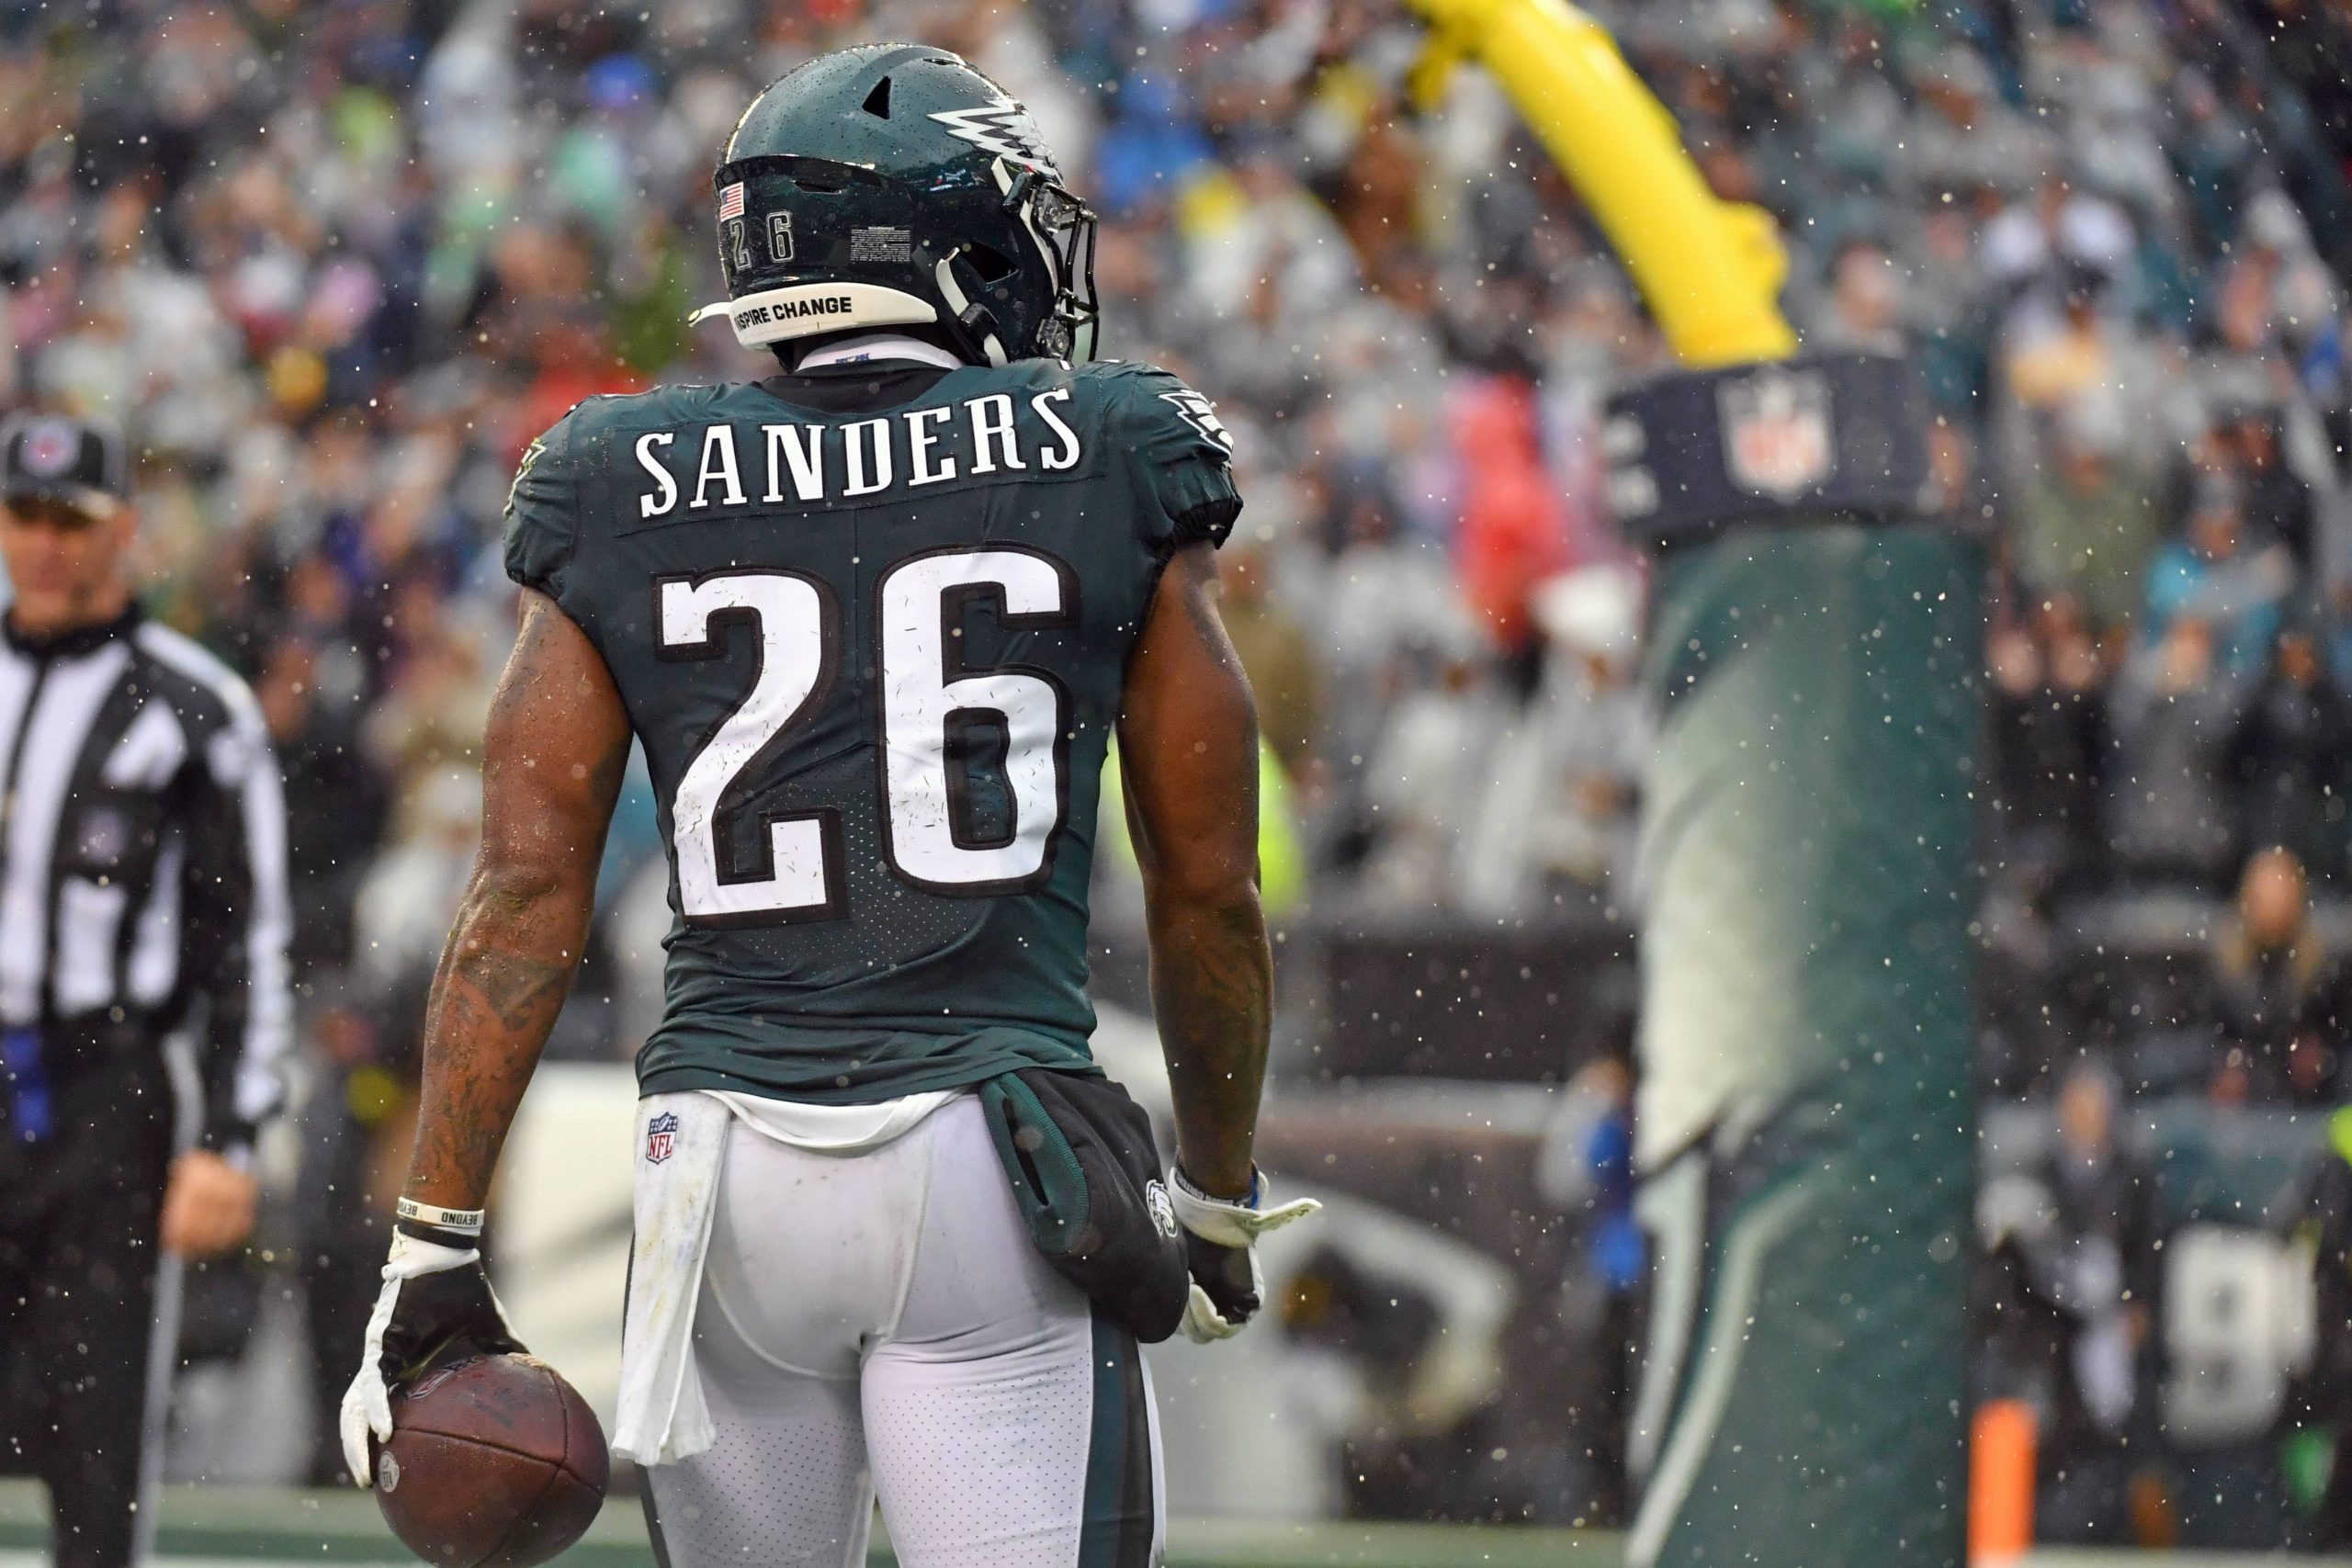 Eagles tie the score vs. Texans with a Miles Sanders TD to cap an 18-play  drive